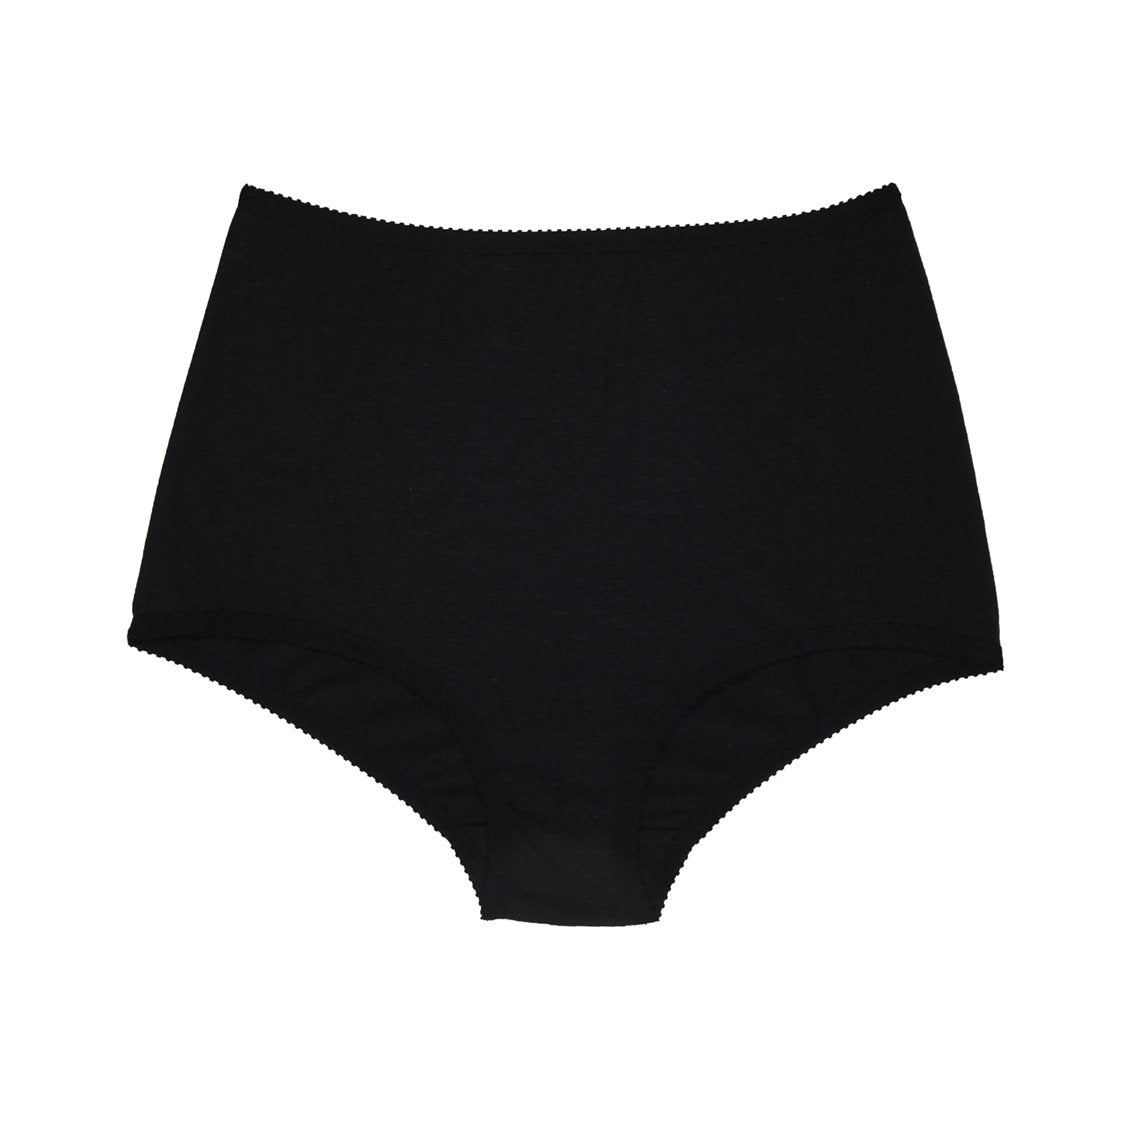 Black High Waisted Underwear  Made in Australia by Hopeless